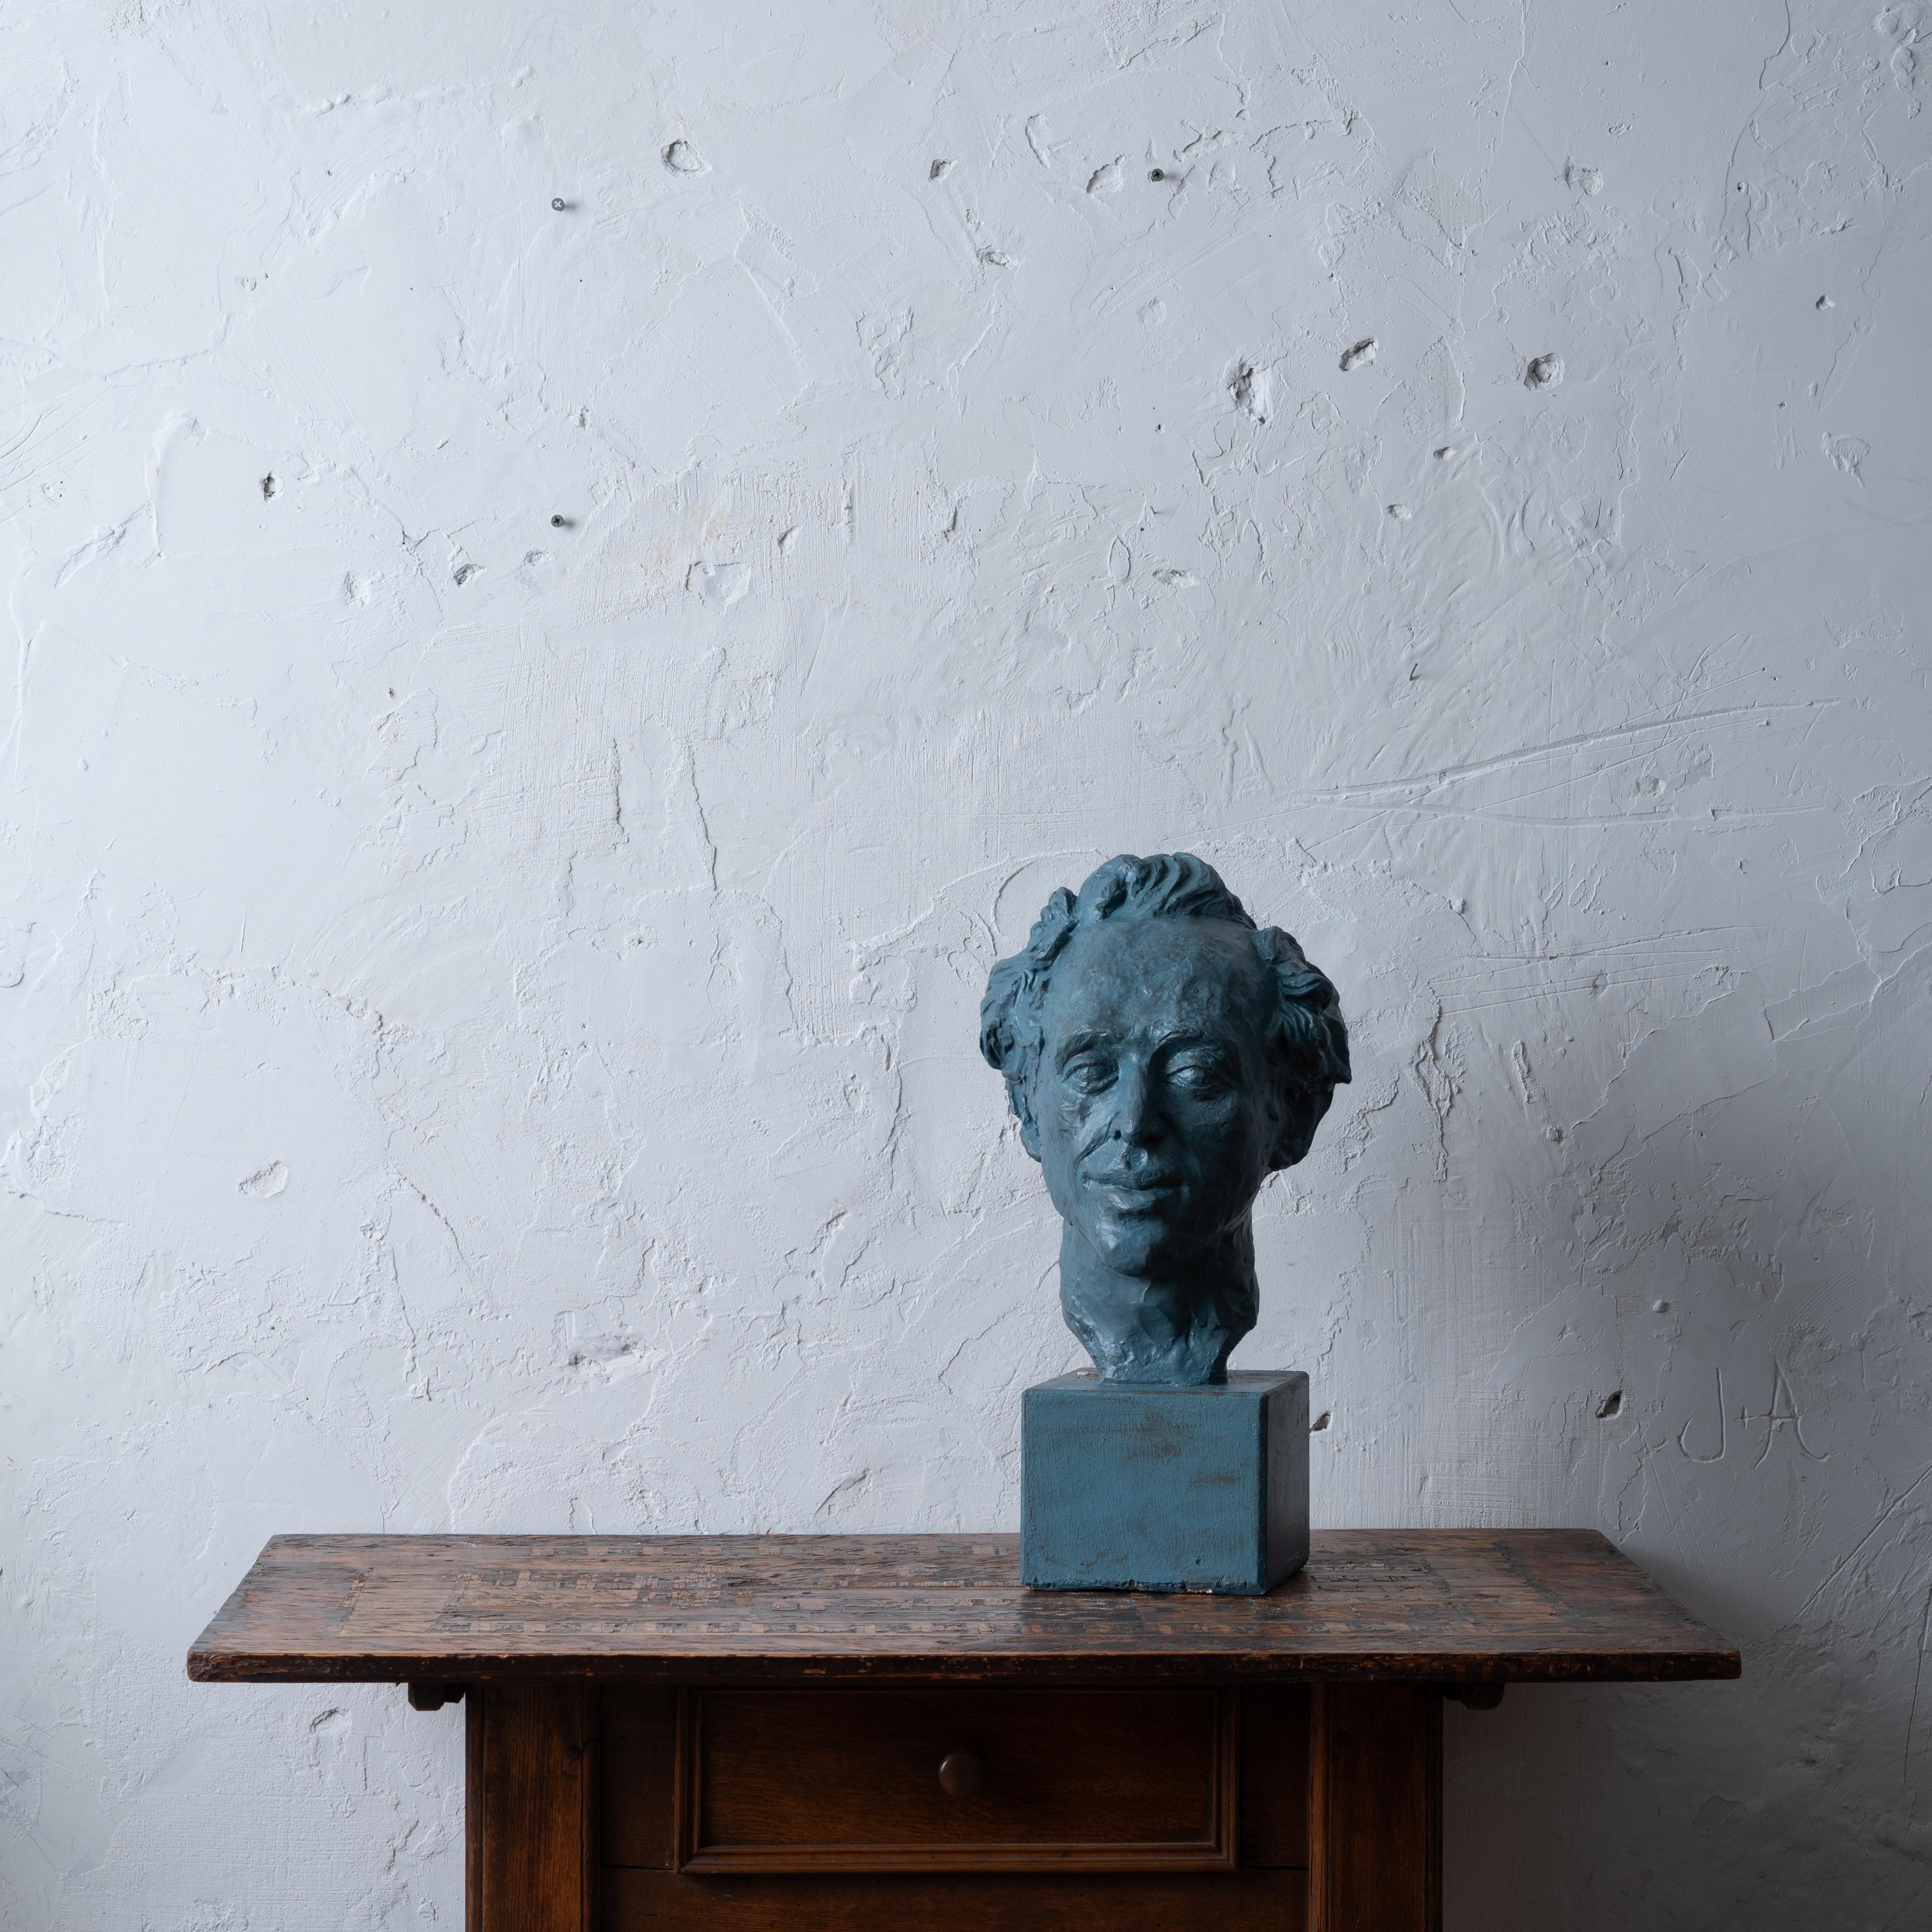 Florence Fiore
(American, 1905-1999)

A plaster bust of Ephraim Doner by Florence Fiore, circa 1930s.

Ephraim Doner was a prominent figure and artist of the Big Sur and Carmel milieu in the mid 20th century. He was a friend to Henry Miller who